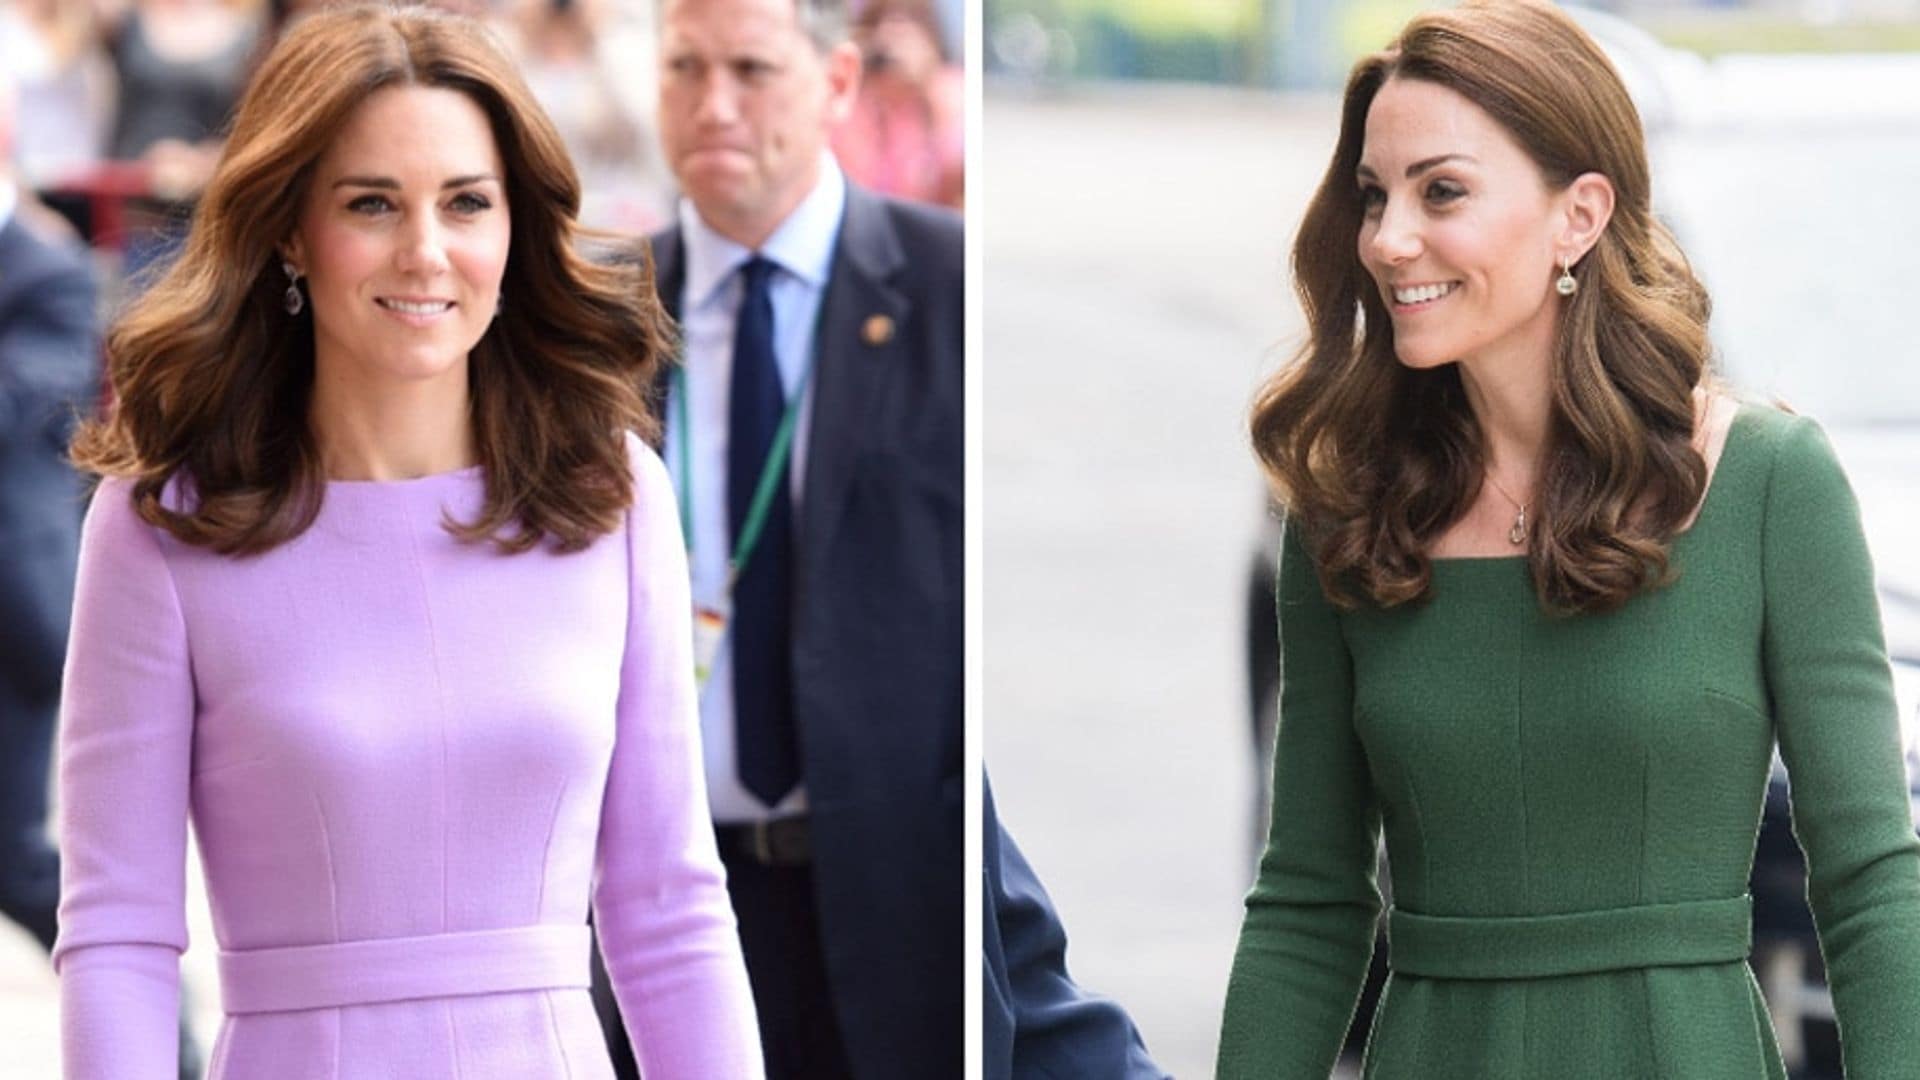 Kate Middleton cleverly recycled one of her favorite dresses and nailed the look